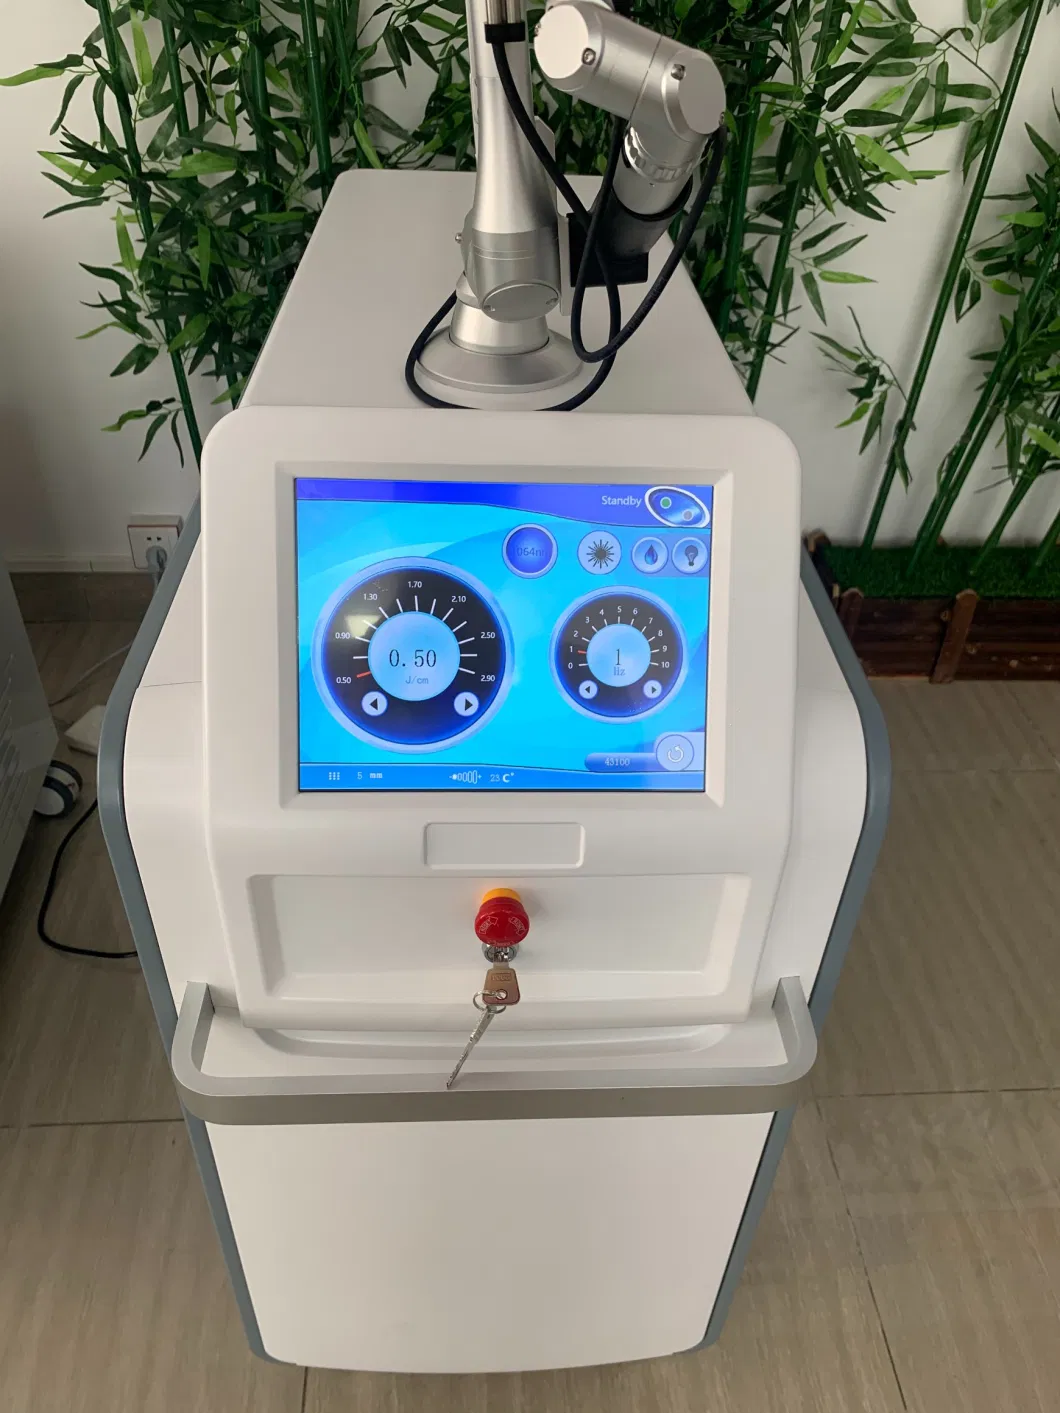 2023 Vertical Picolaser Picosecond Chloasma/Age Spot/Tarroo Removal ND YAG Laser Pico Second laser 1064nm Tattoo Removal Machine